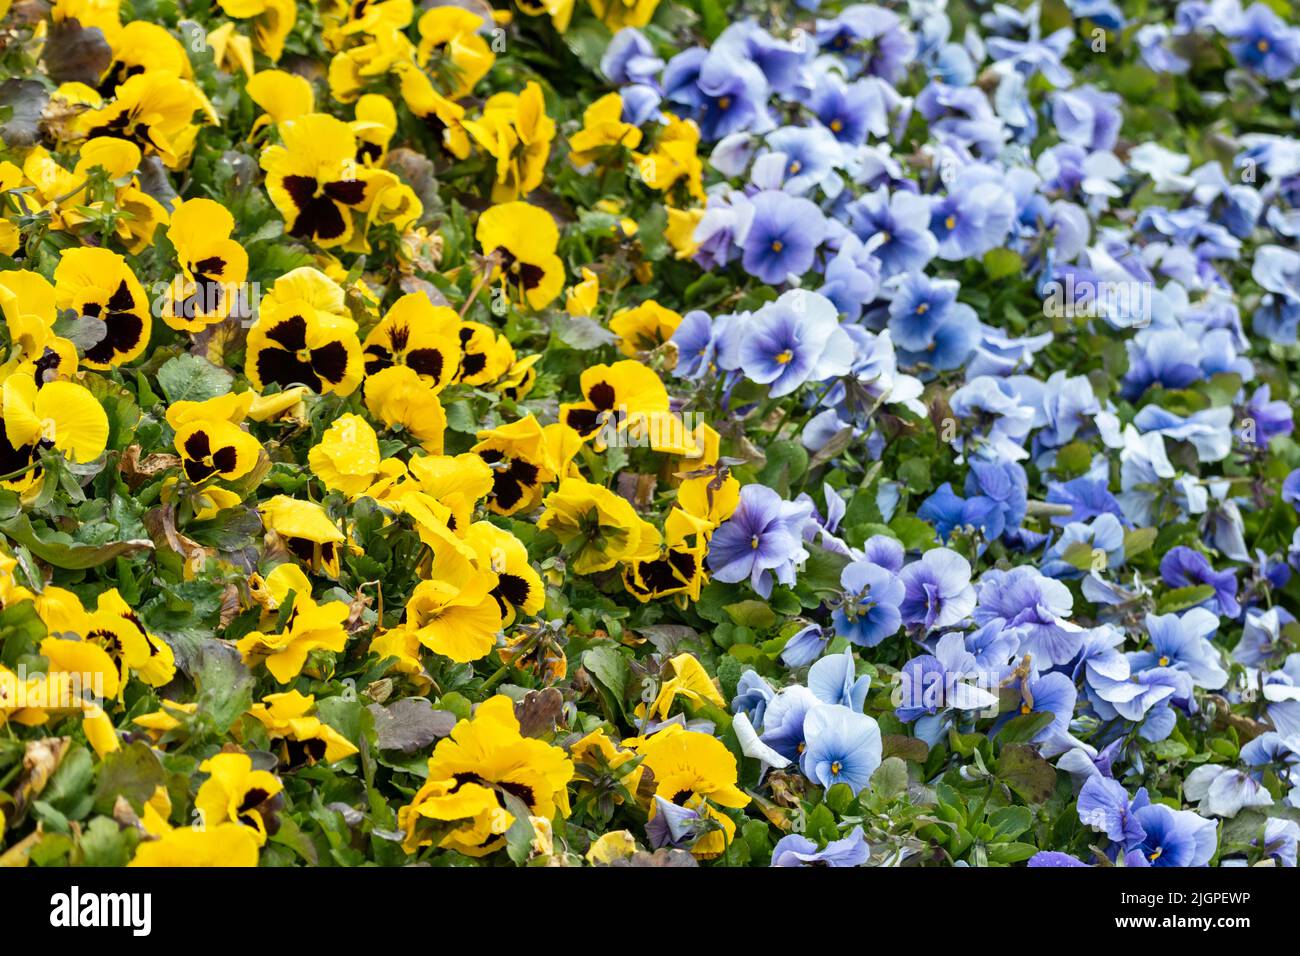 Vibrant yellow and blue Viola Cornuta pansies flowers close-up, floral background with blooming heartsease pansy flowers with green leaves Stock Photo